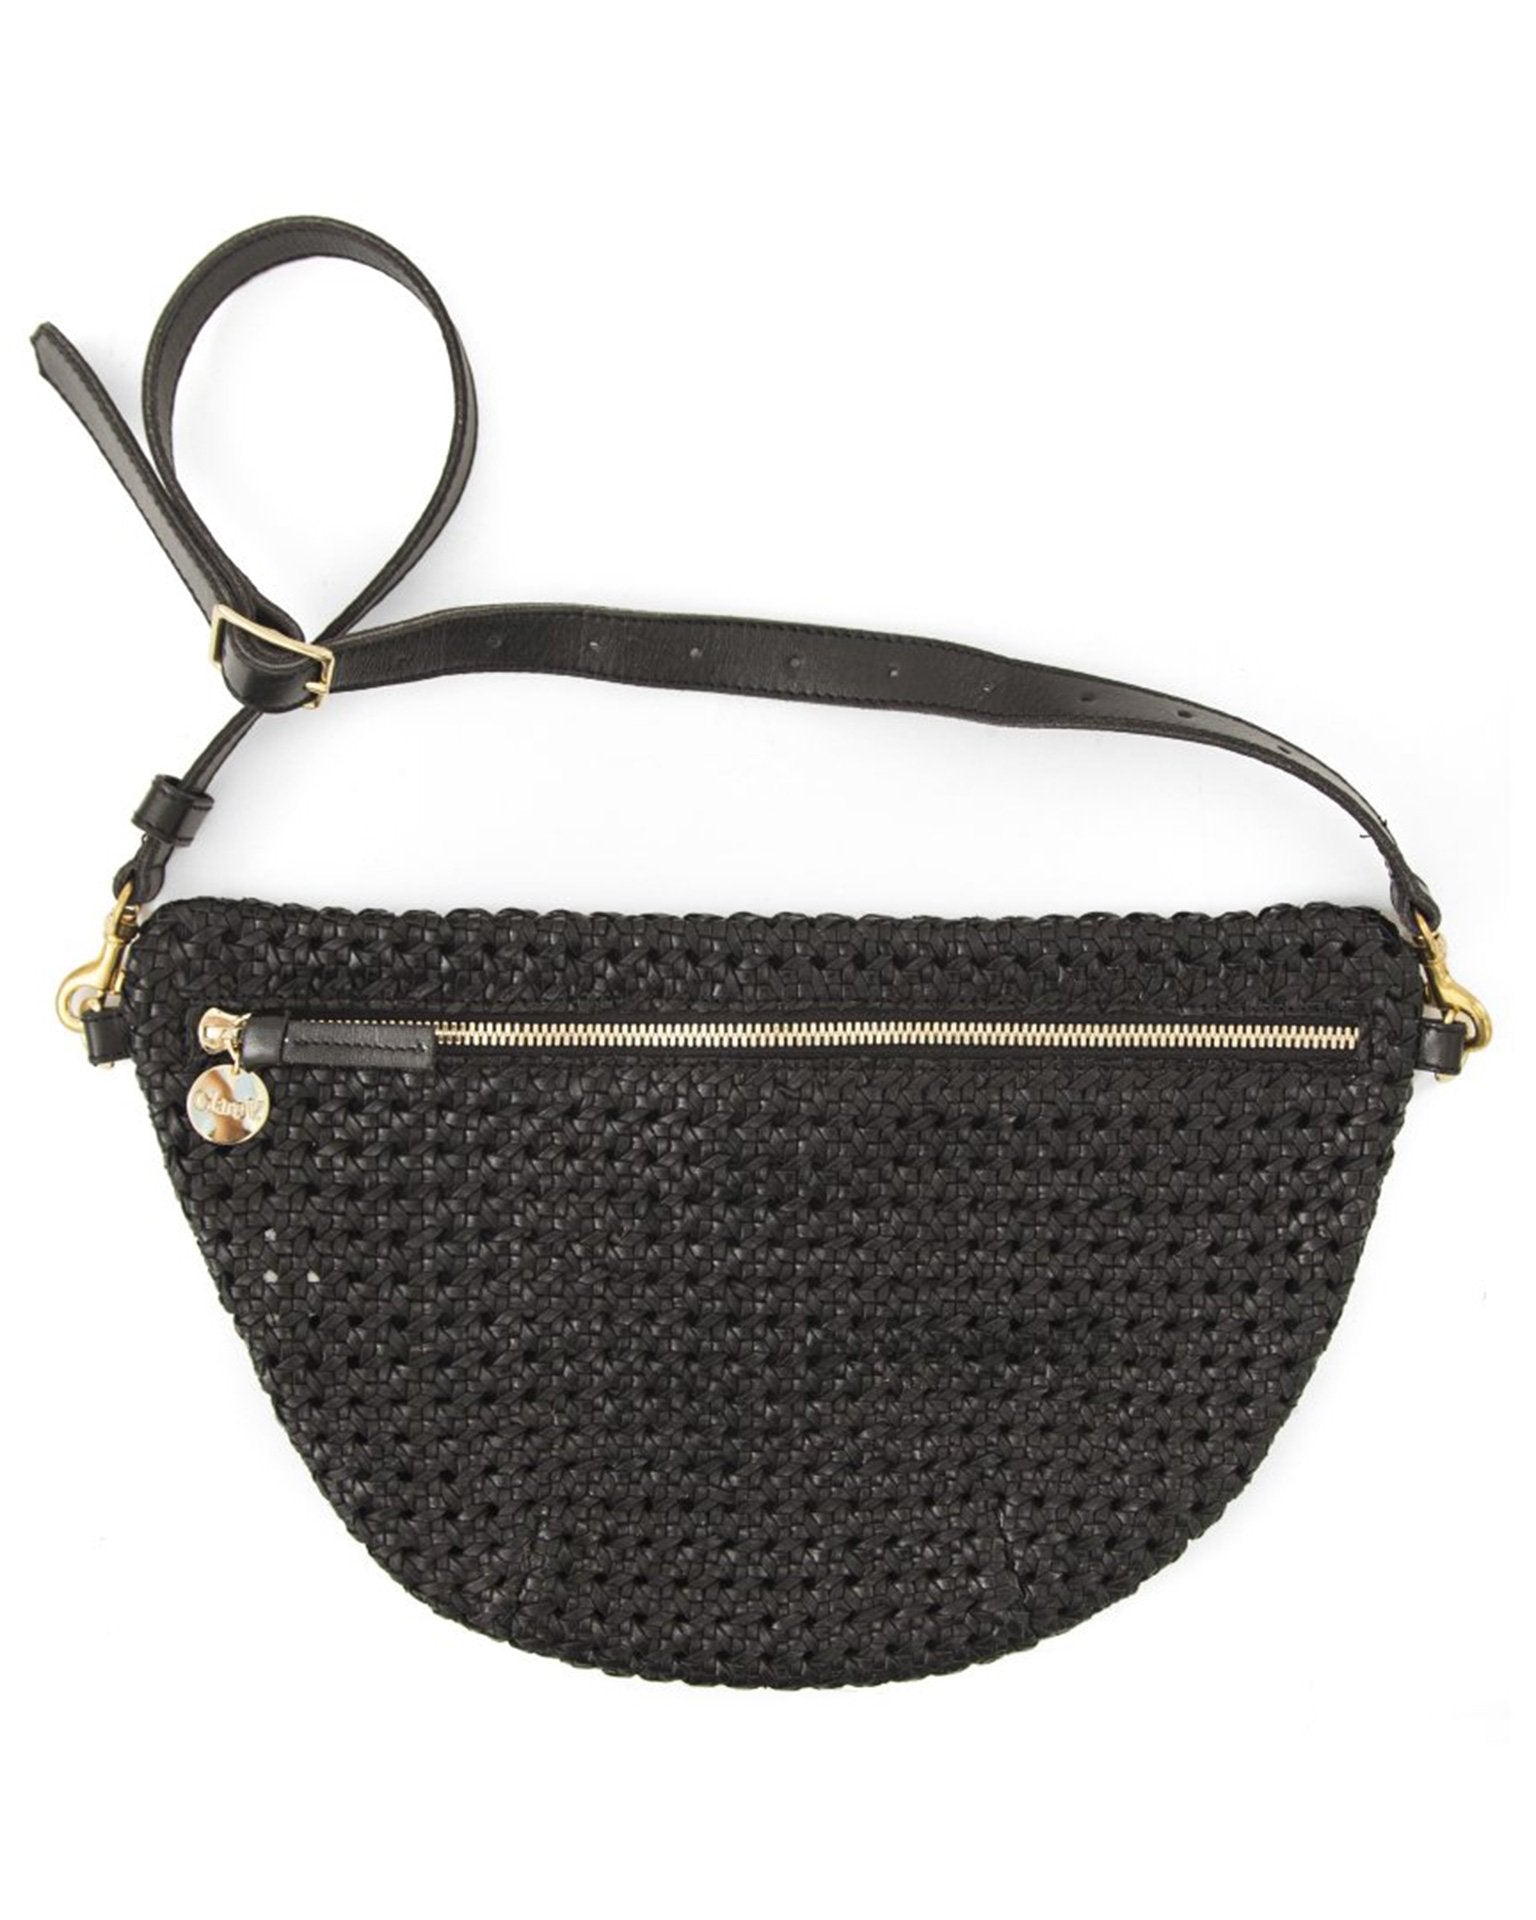 She's new: The Black Rattan Fanny Pack (along with her back-in